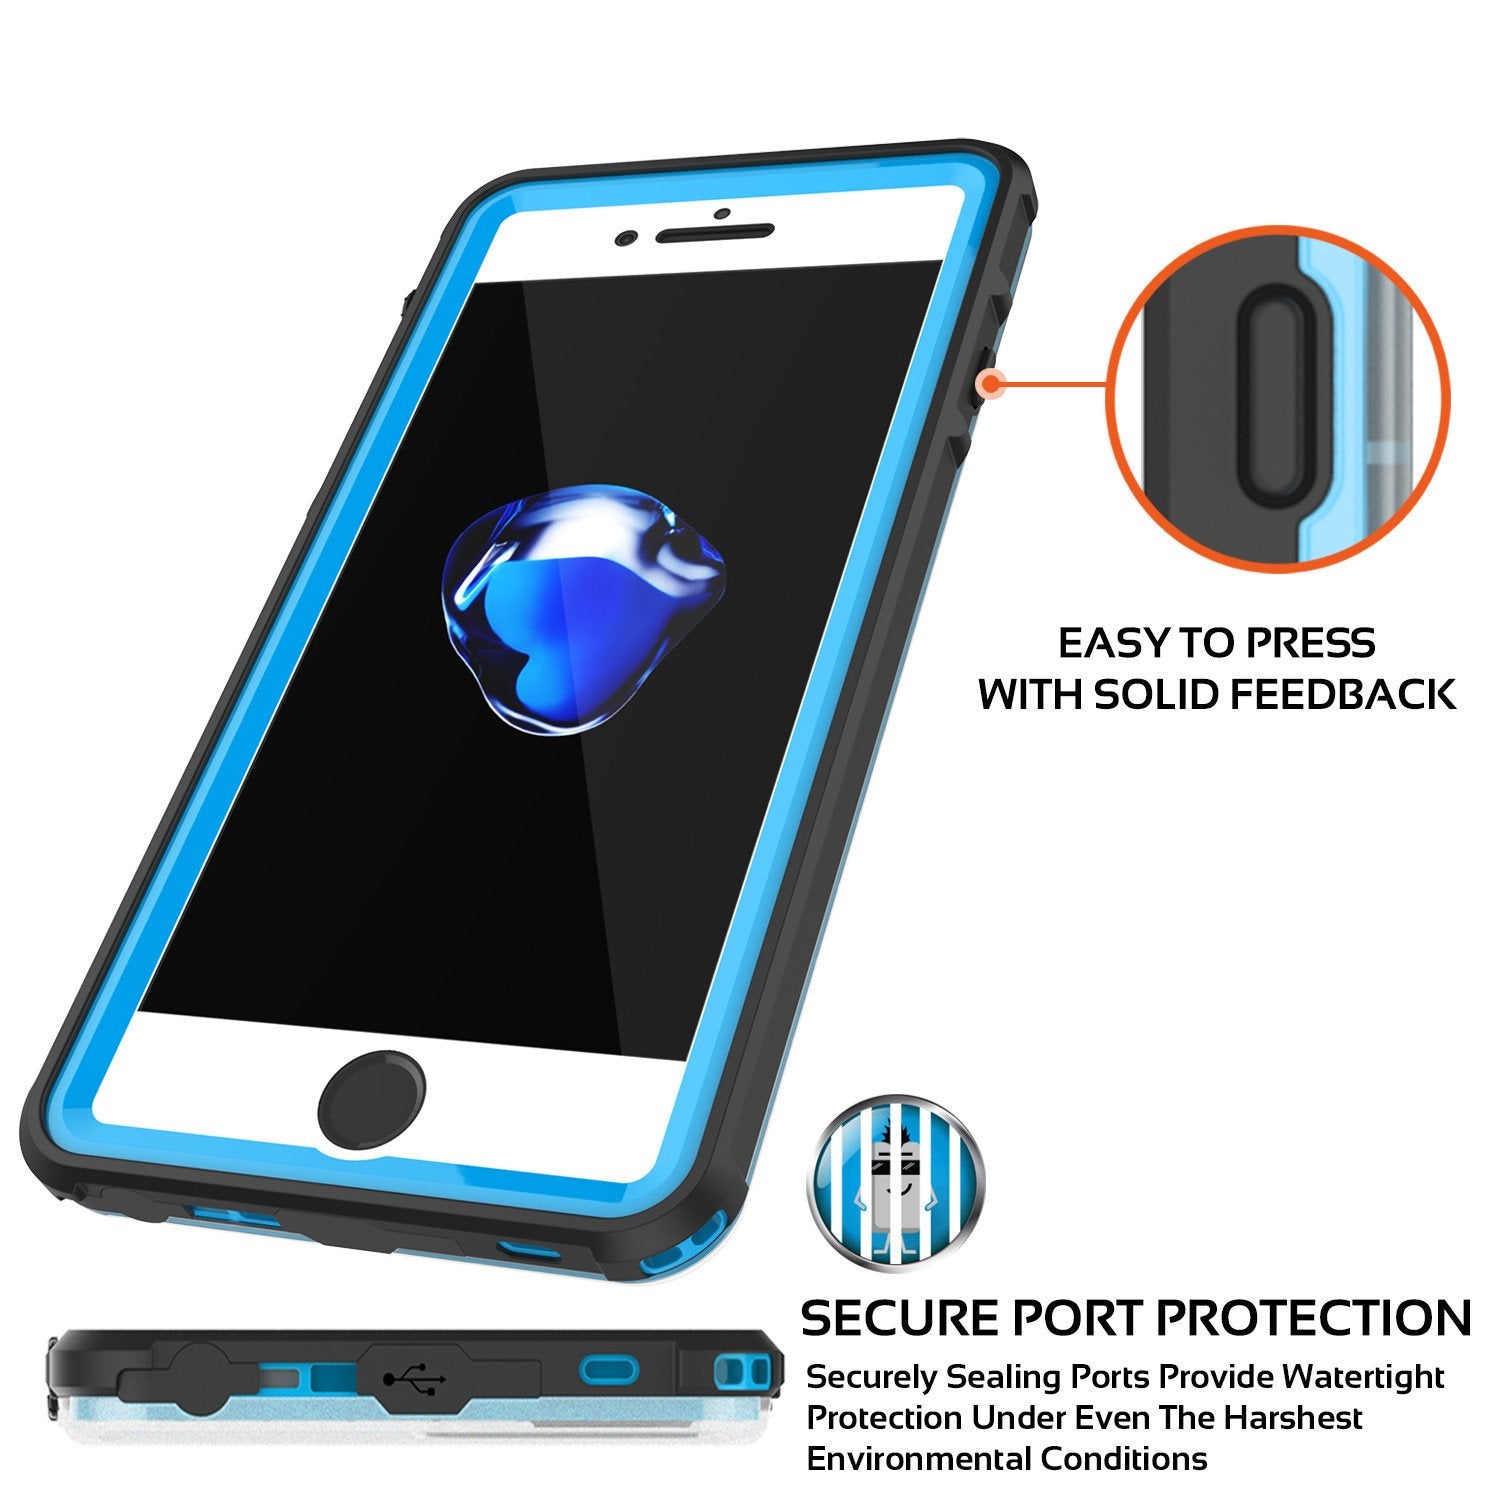 iPhone 7+ Plus Waterproof Case, PUNKcase CRYSTAL Light Blue  W/ Attached Screen Protector  | Warranty